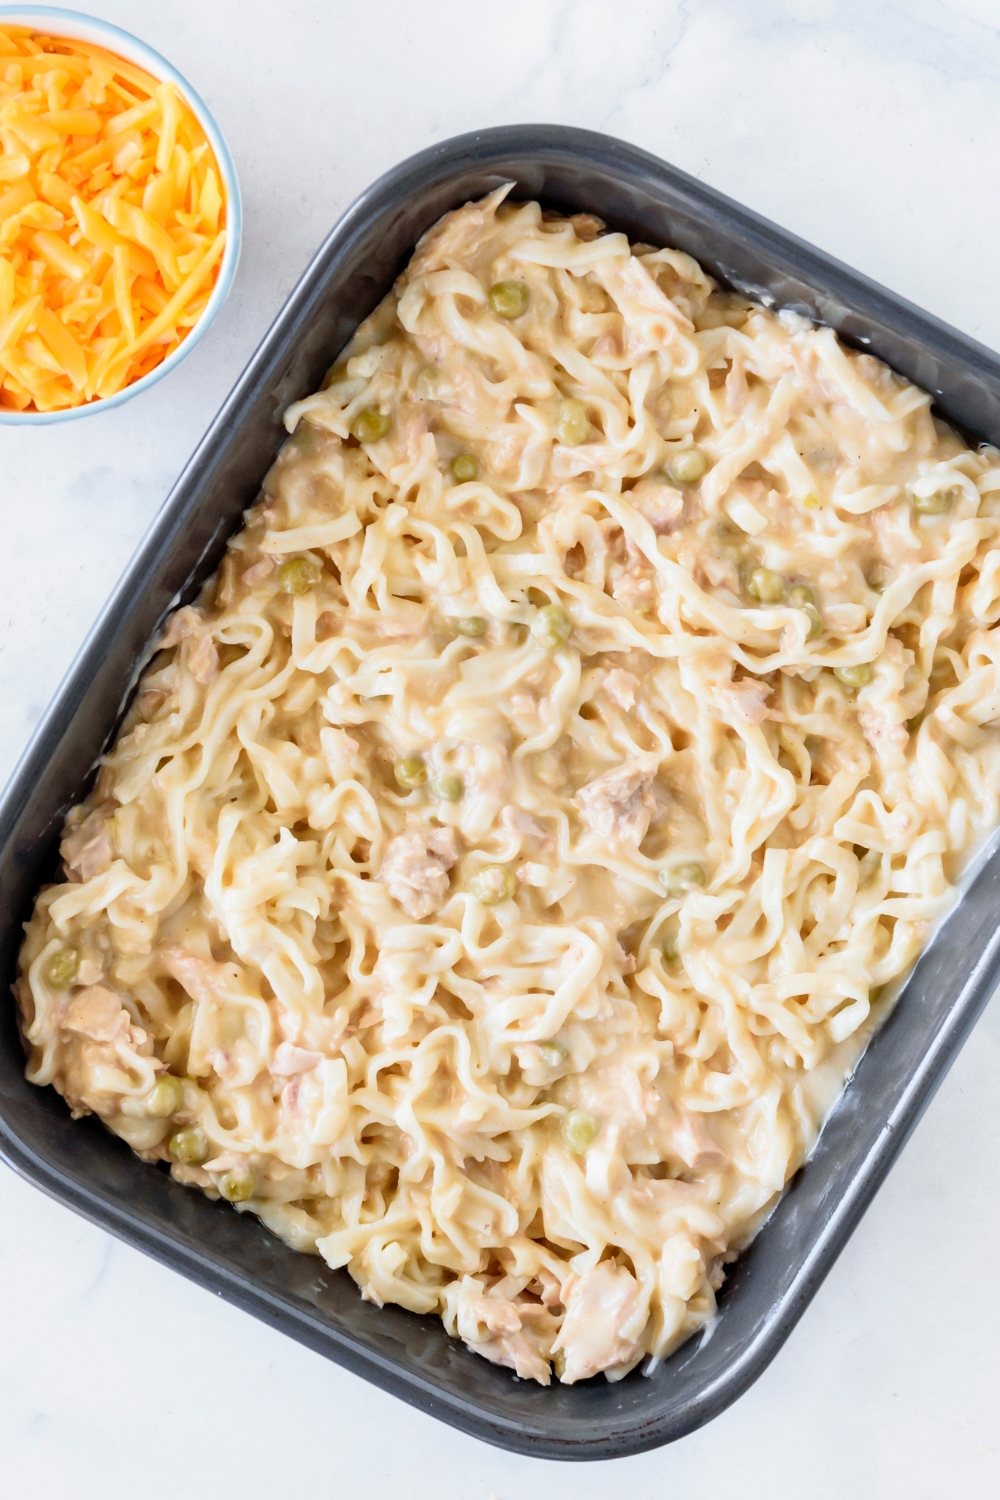 A baking dish filled with egg noodles and tuna in a creamy sauce.